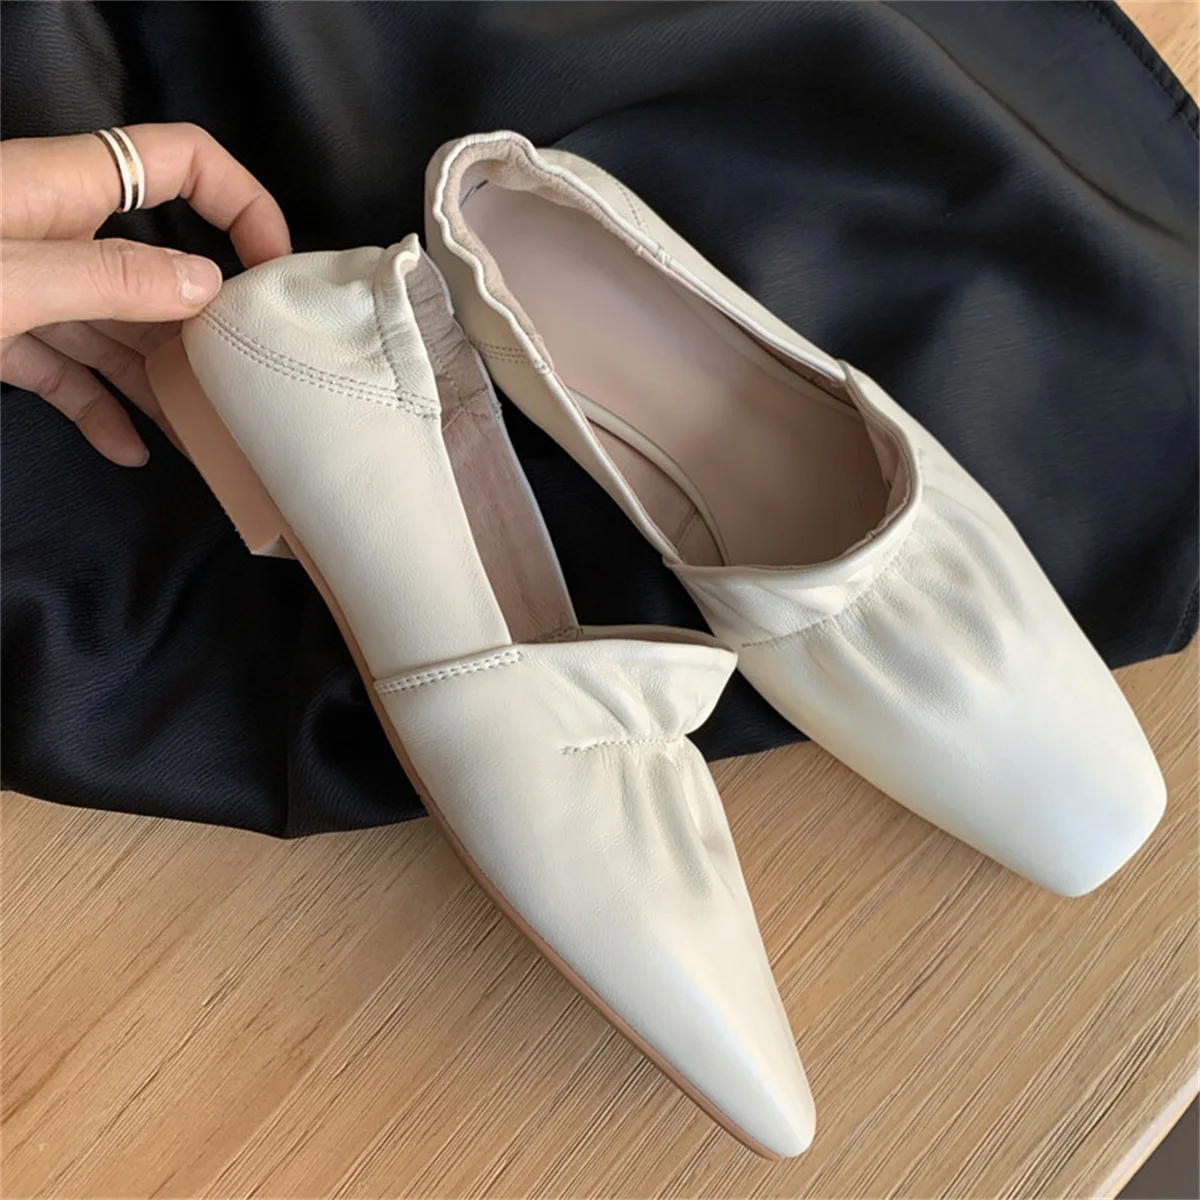 2022 Spring Fashion Women's Flat Shoes Comfortable Real Leather Material Daily Casual Square Toe Shoes